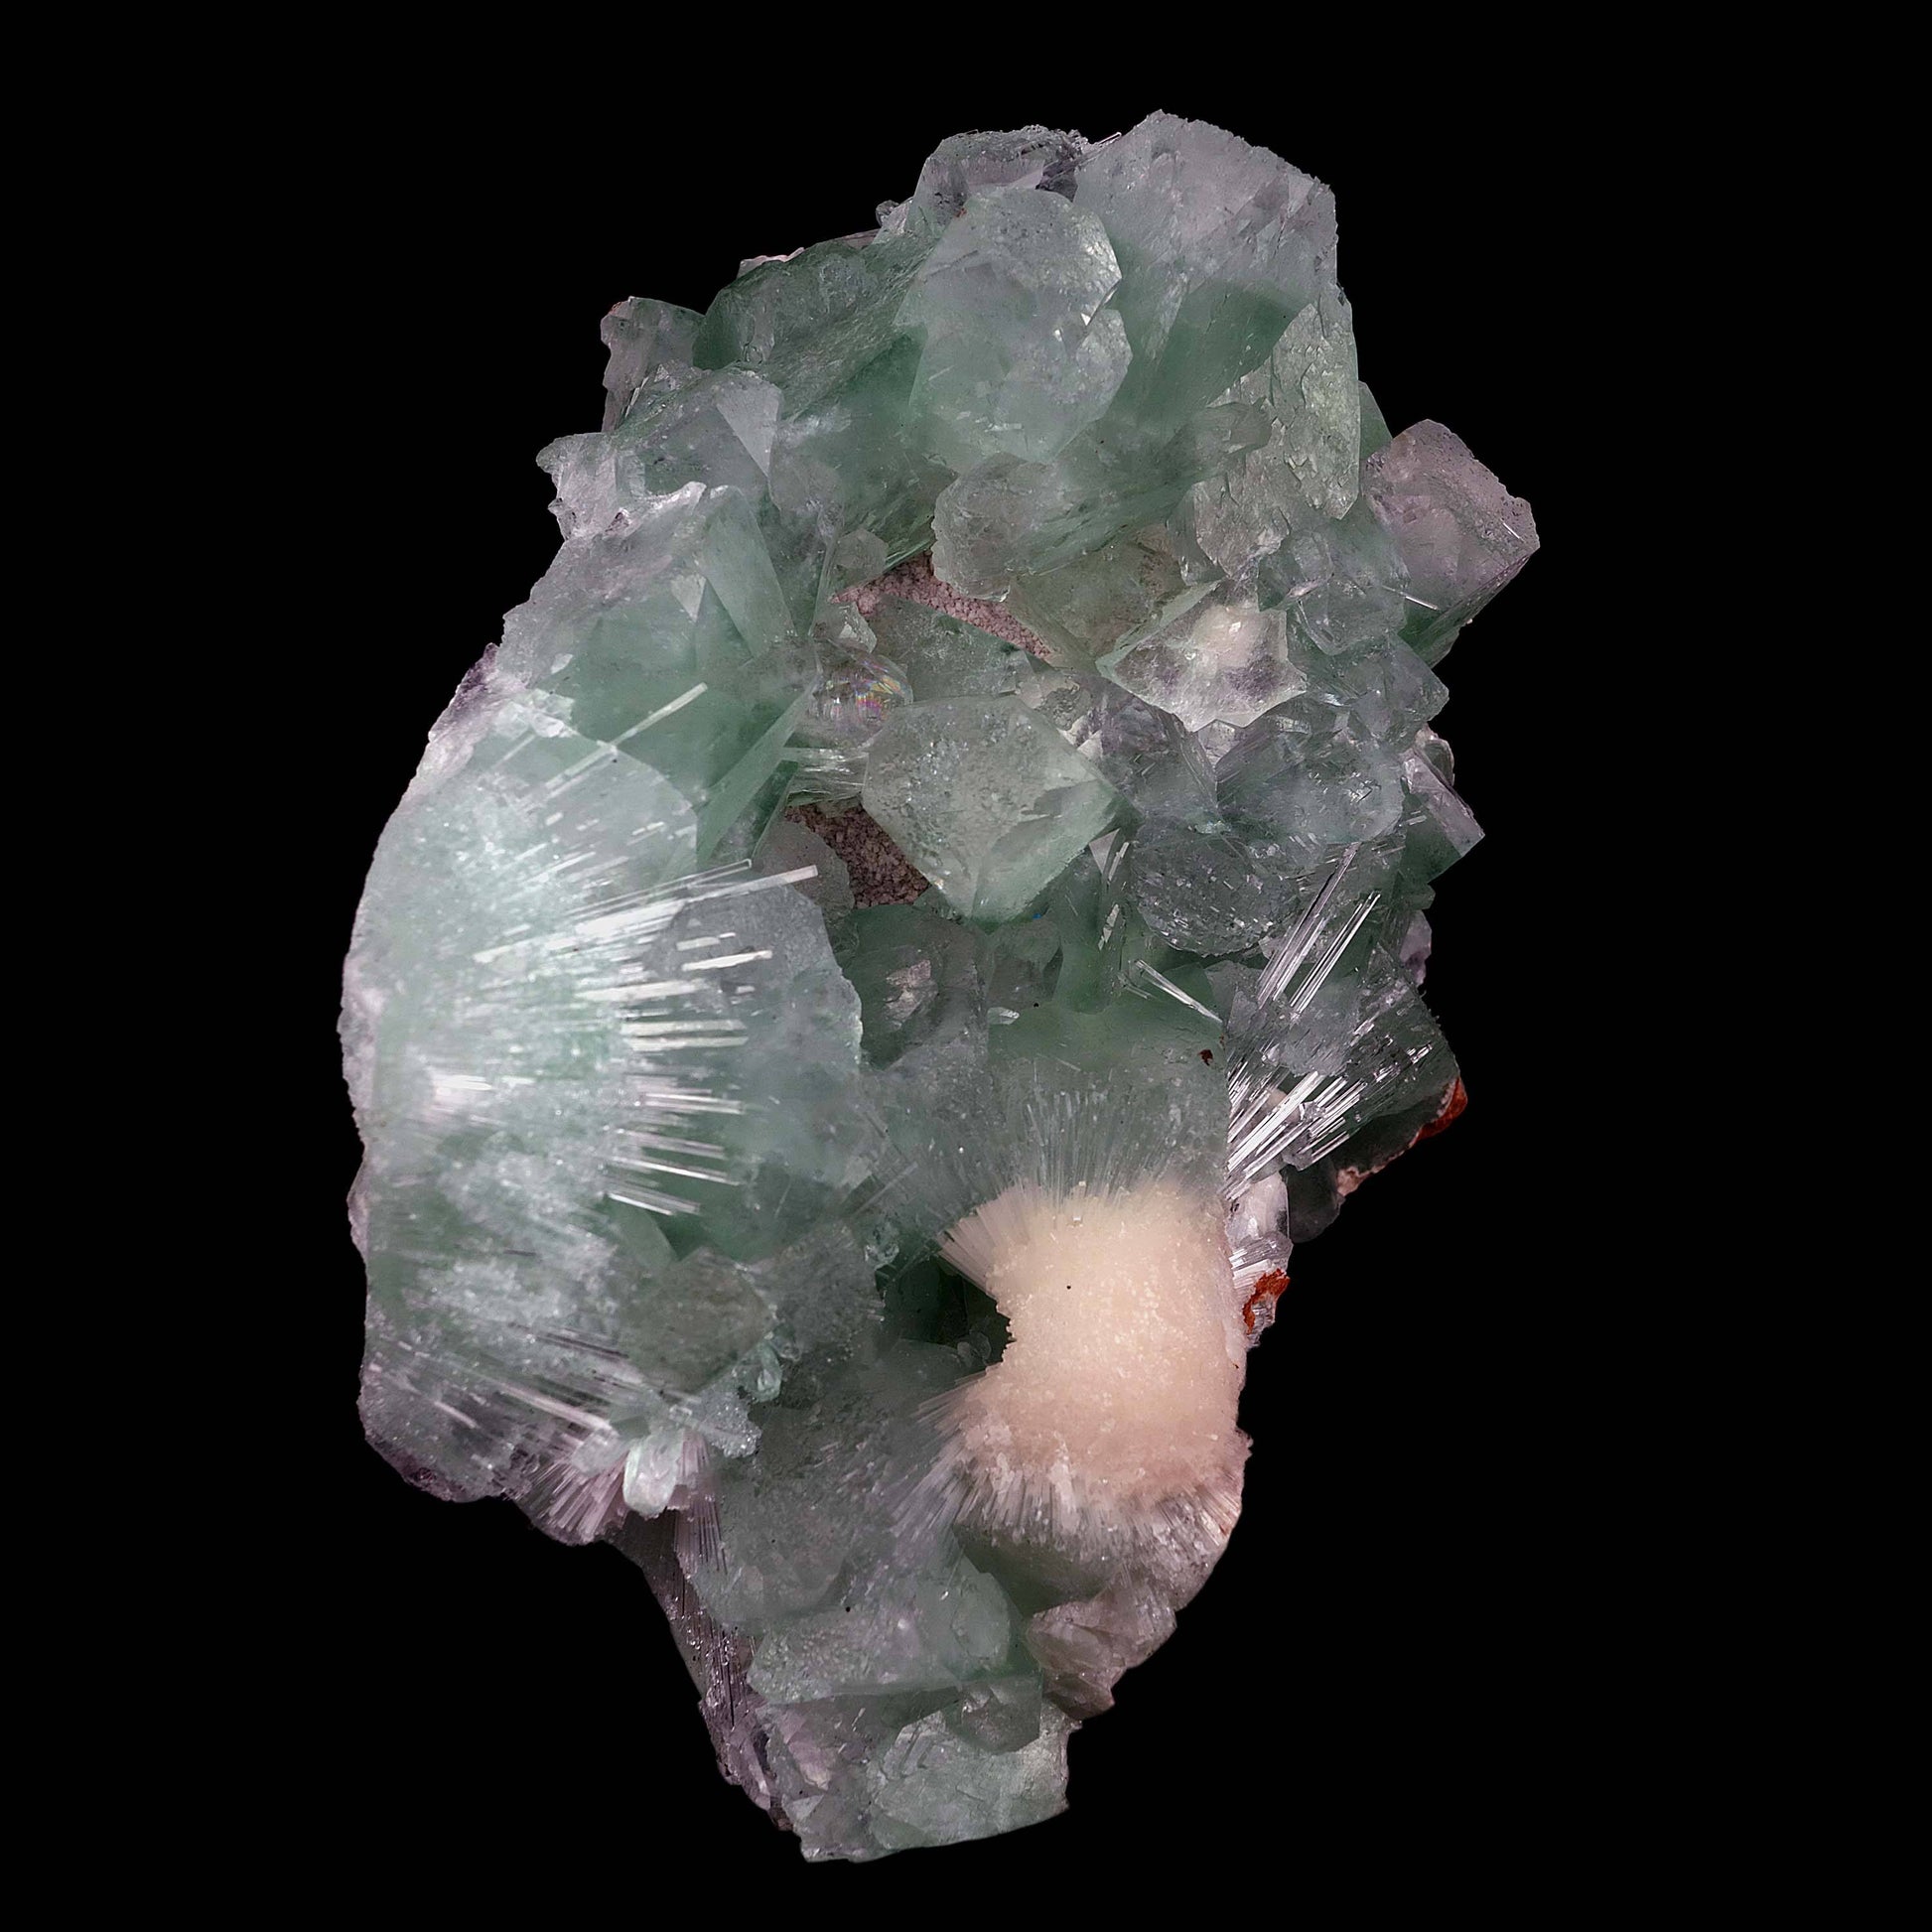 Green Apophyllite Cubical Crystals with Scolecite Natural Mineral Spec…  https://www.superbminerals.us/products/disco-green-apophyllite-with-scolecite-natural-mineral-specimen-b-4006  Features Large lustrous transparent green cubical ball Apophyllite crystals to with elongated lustrous transparent colorless Scolecite sprays. A second generation of smaller water-clear Apophyllite crystals grew in the Scolecite.Primary Mineral(s):&nbsp; Green ApophylliteSecondary Mineral(s): Scolecite